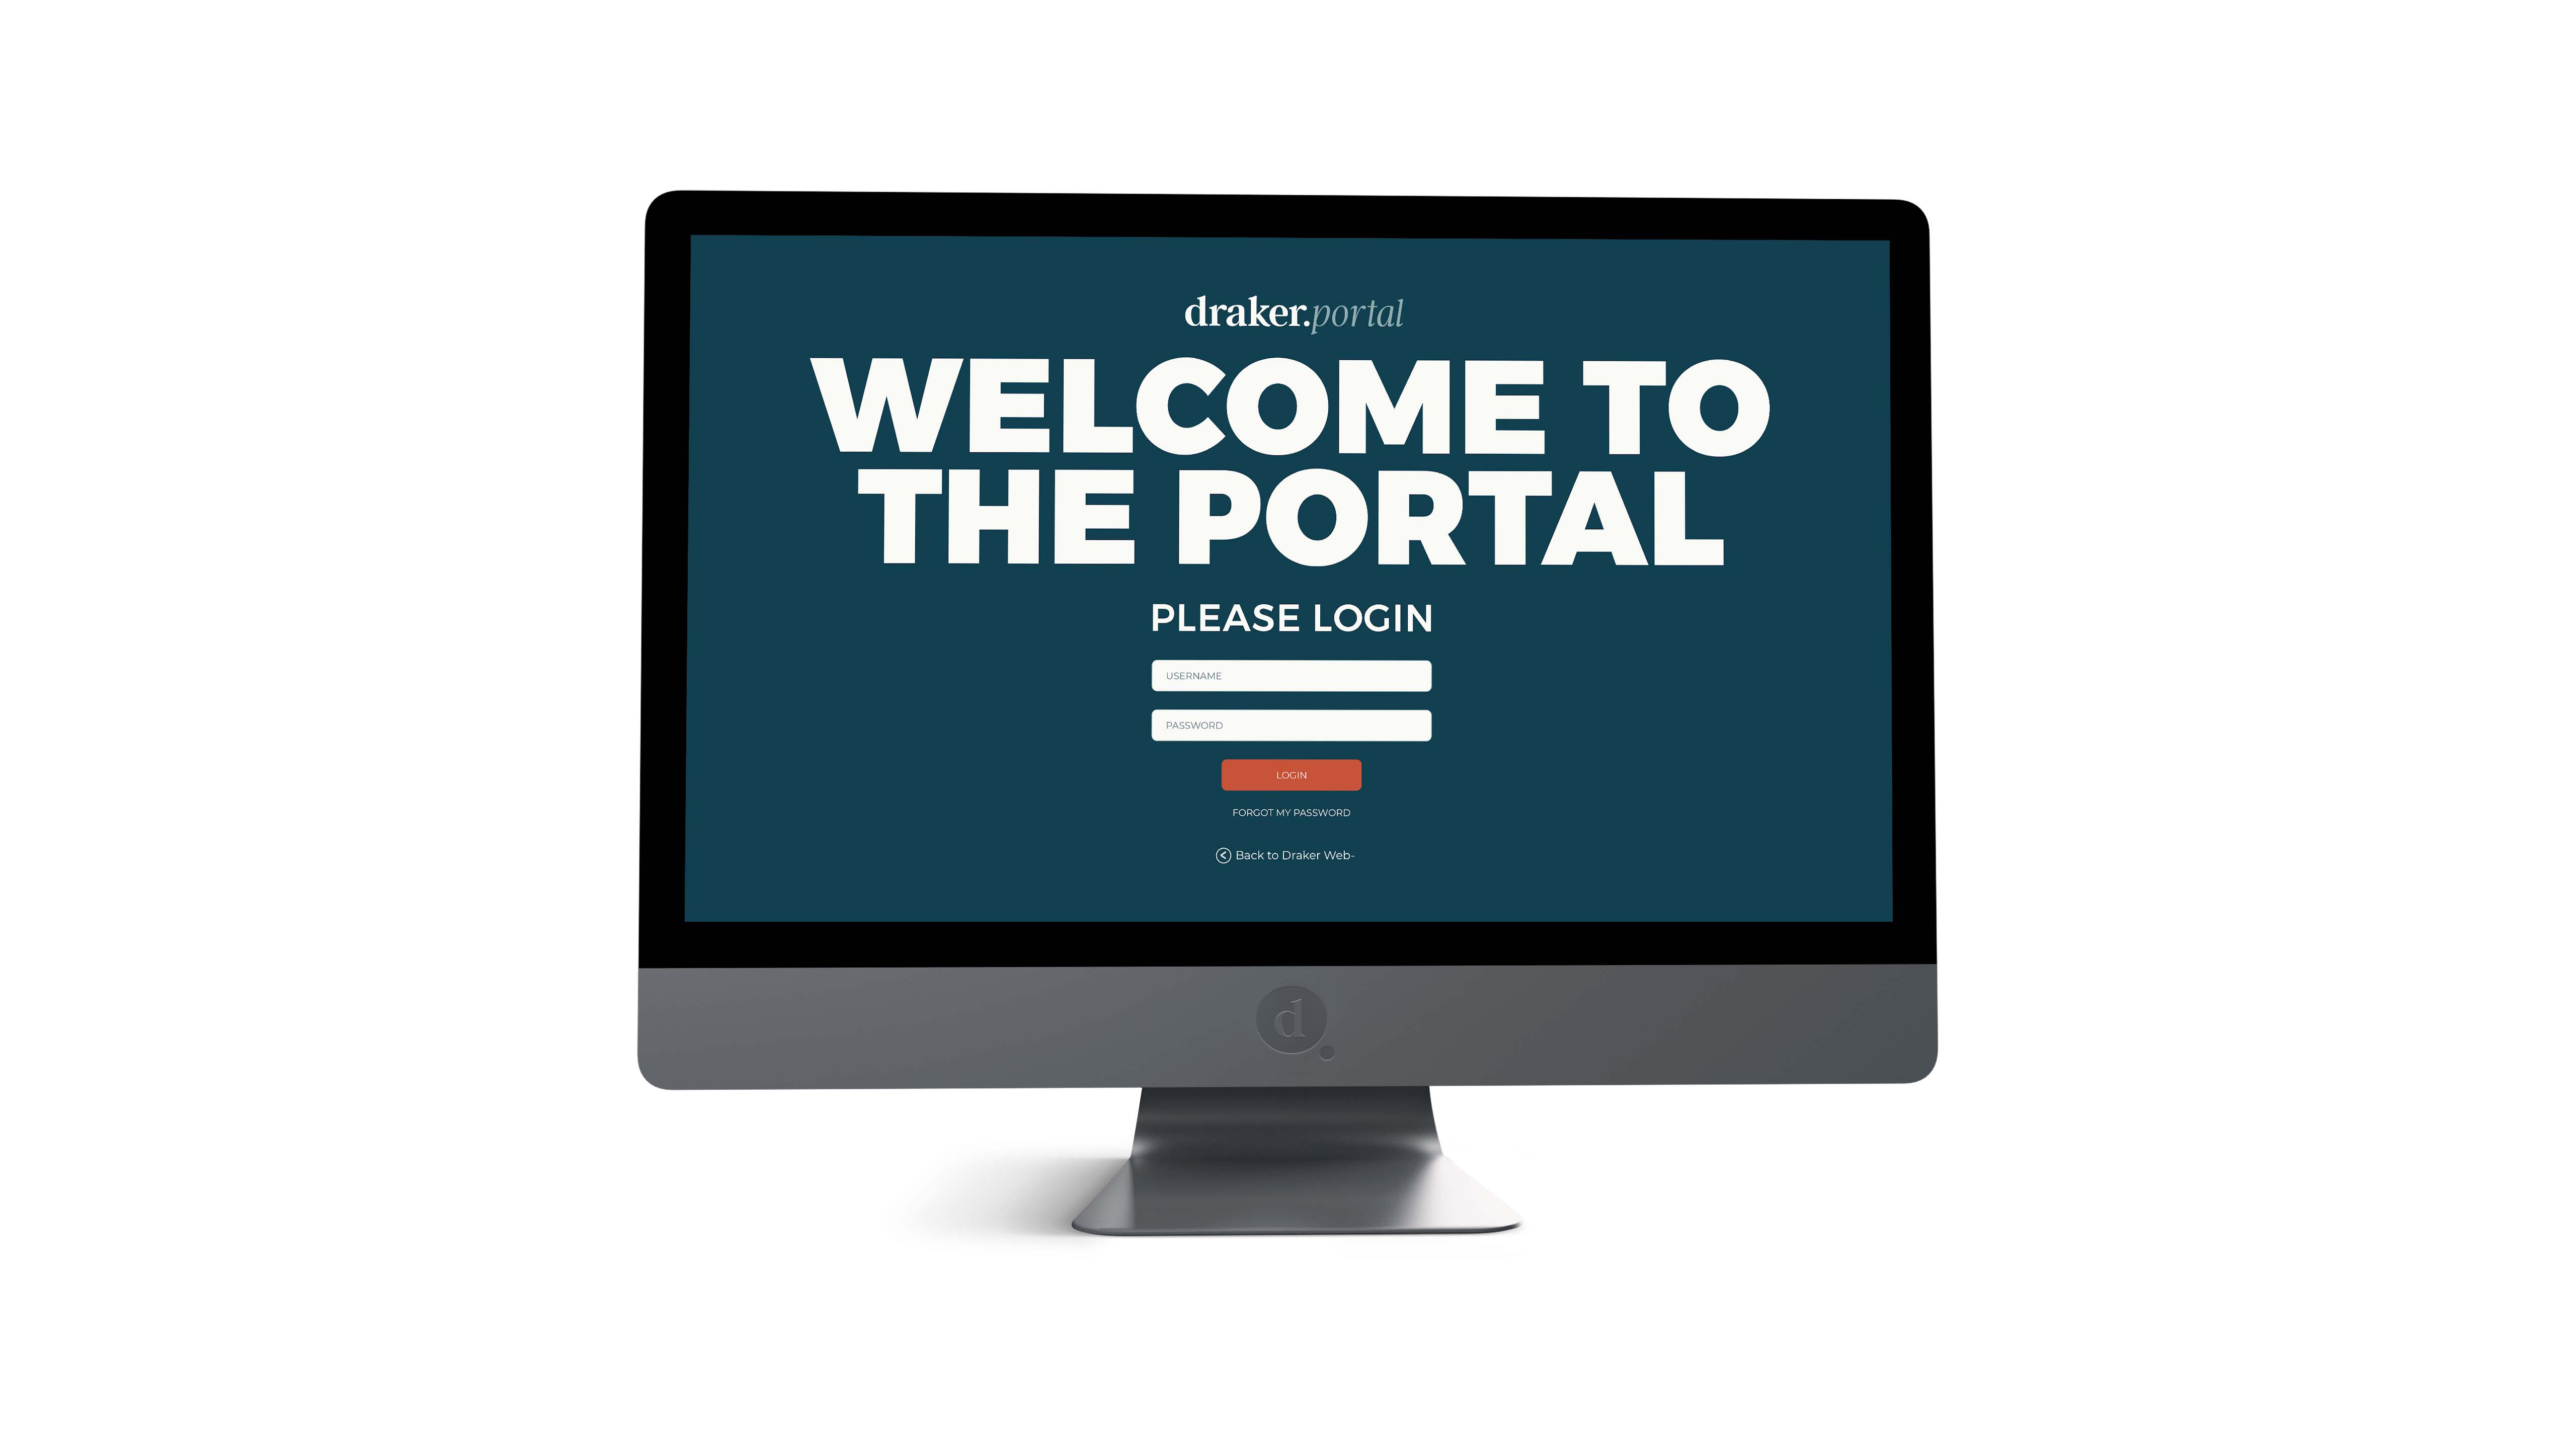 Welcome to the Portal